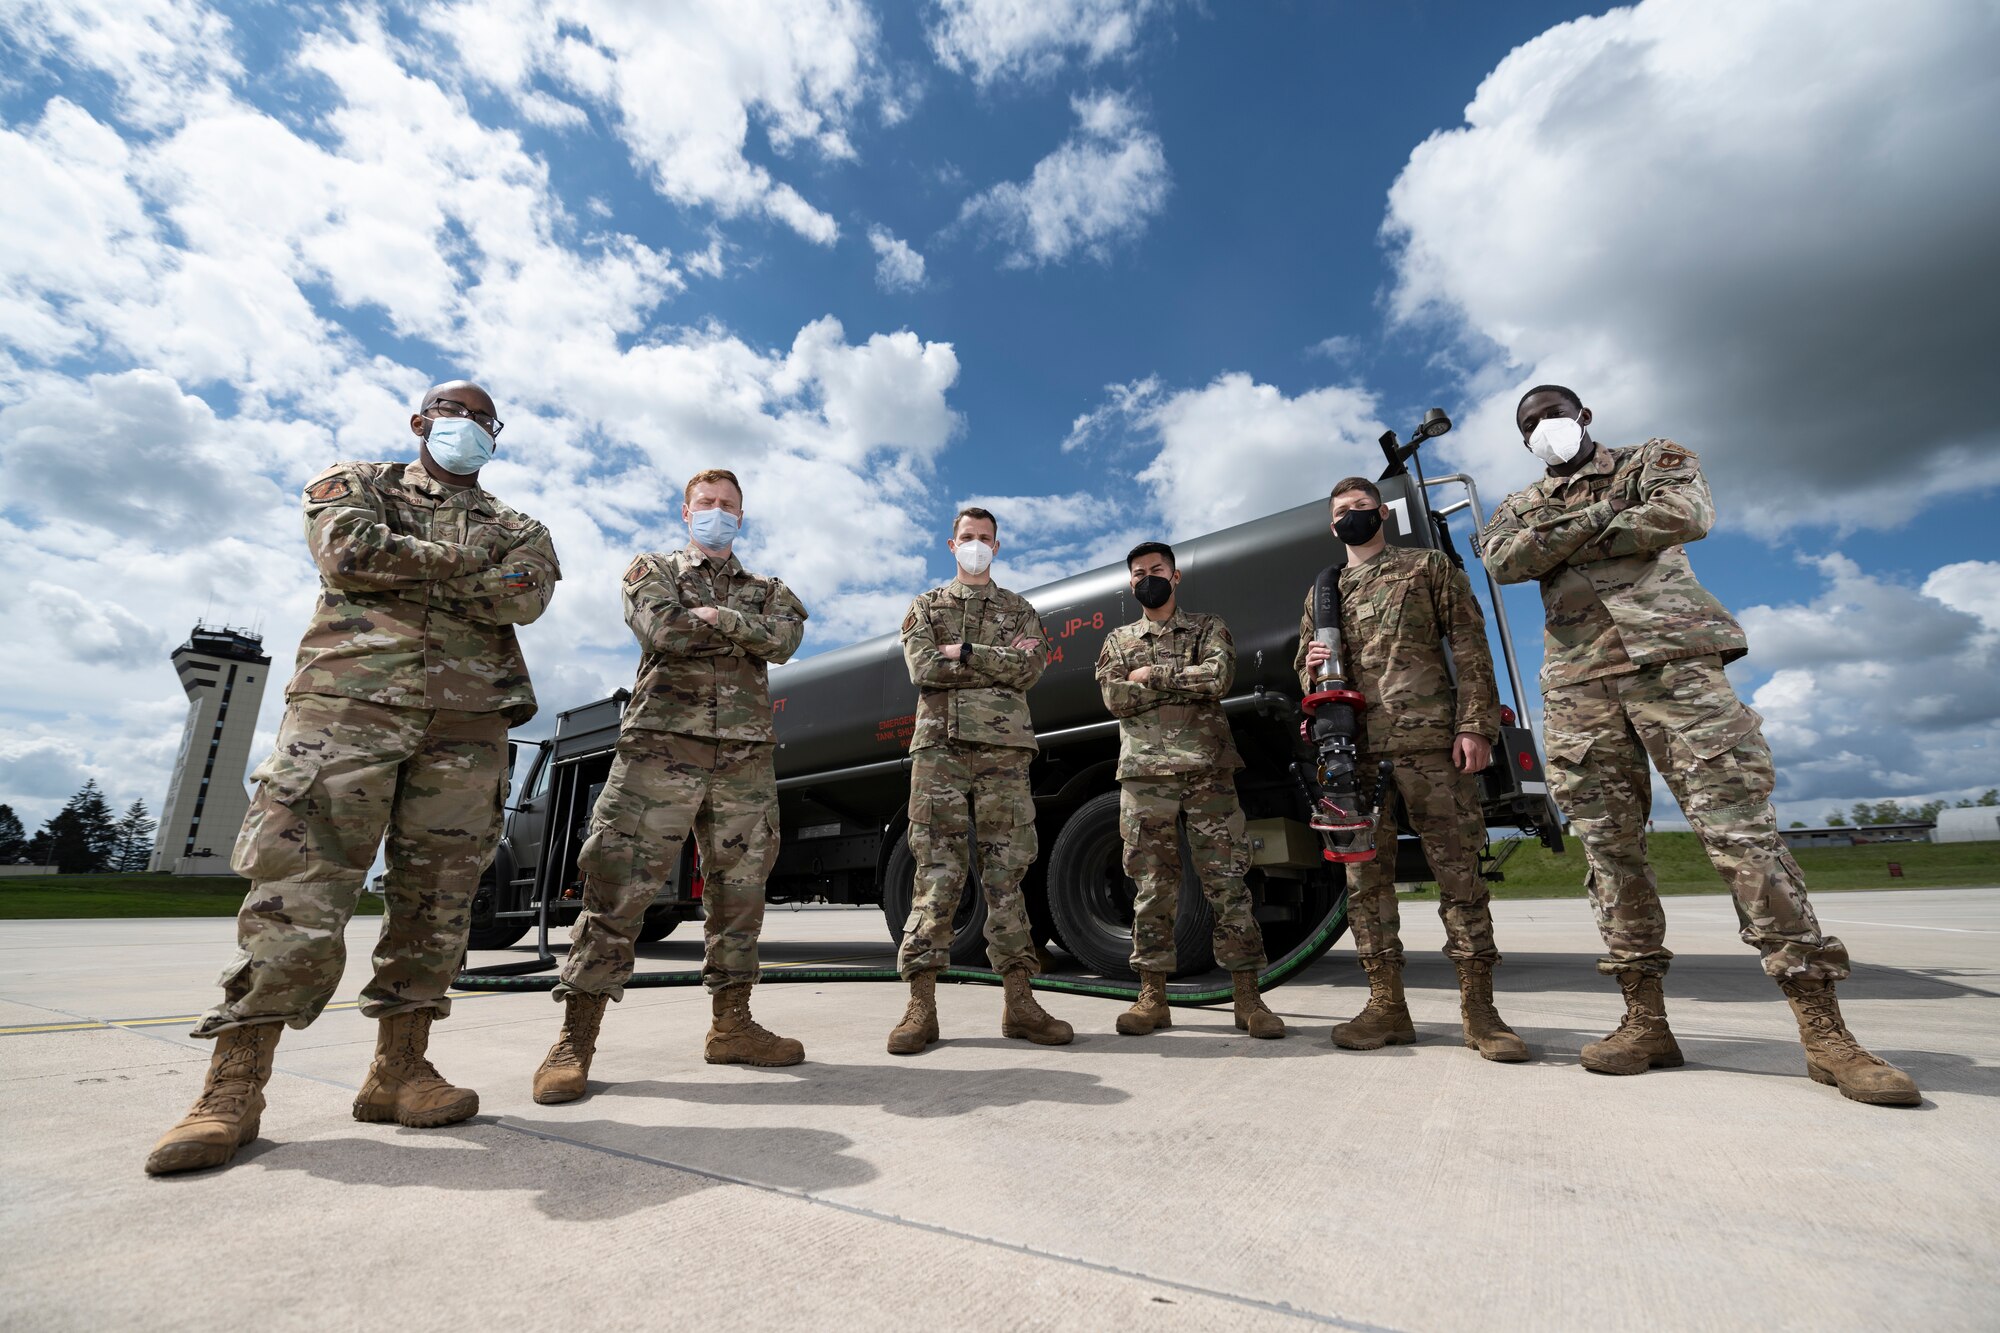 Group portrait of Airmen in front of a fuels truck.